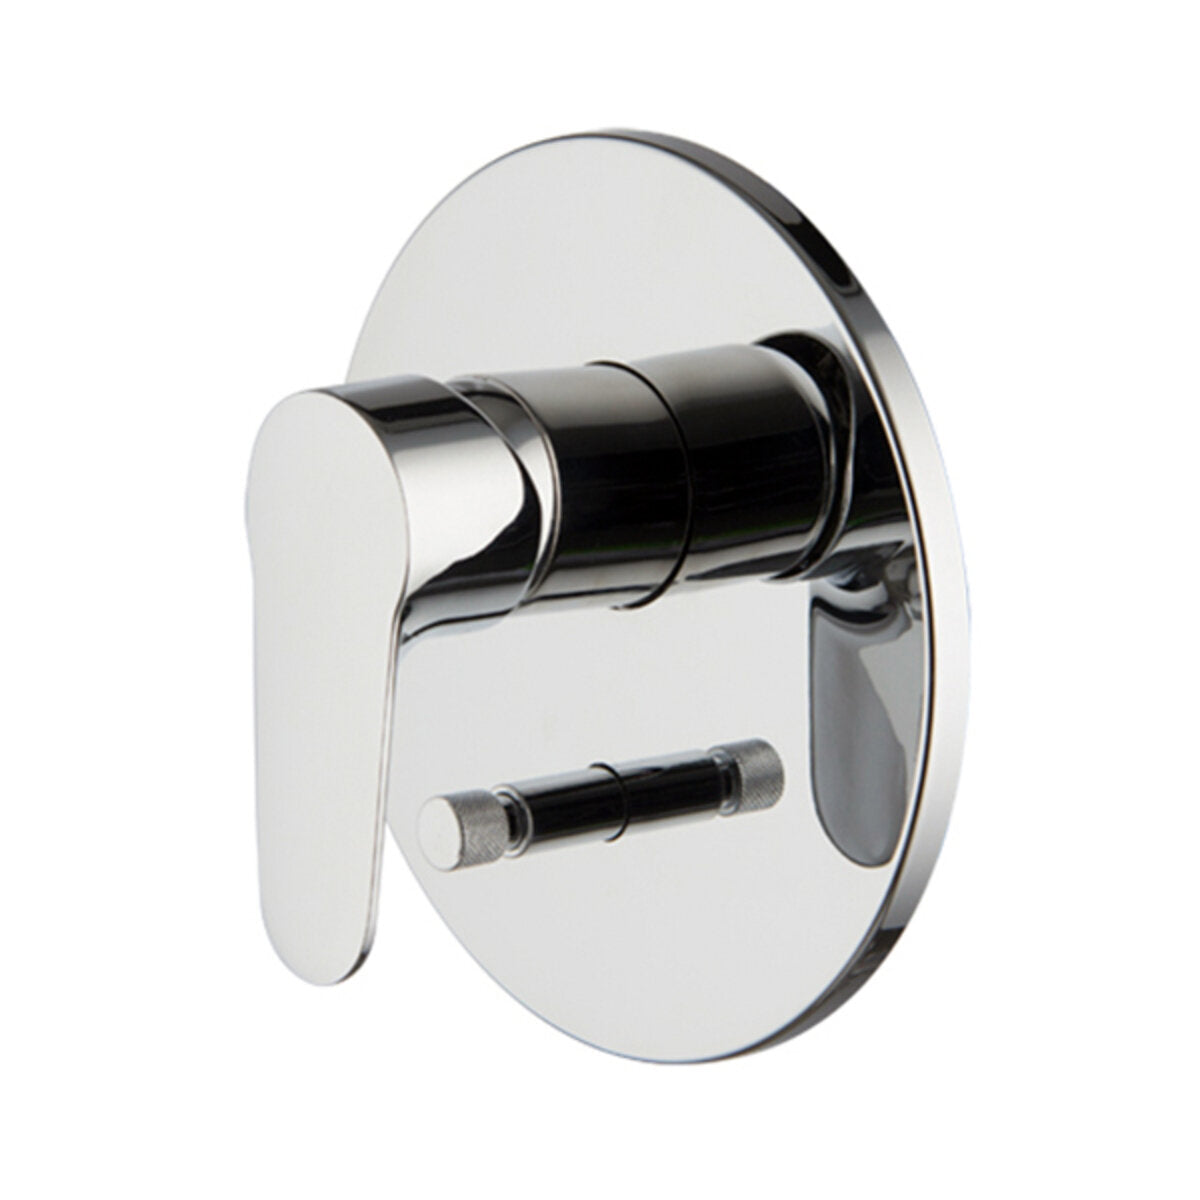 Fima Carlo Frattini series 22 built-in bath and shower mixer two-way diverter complete with built-in body